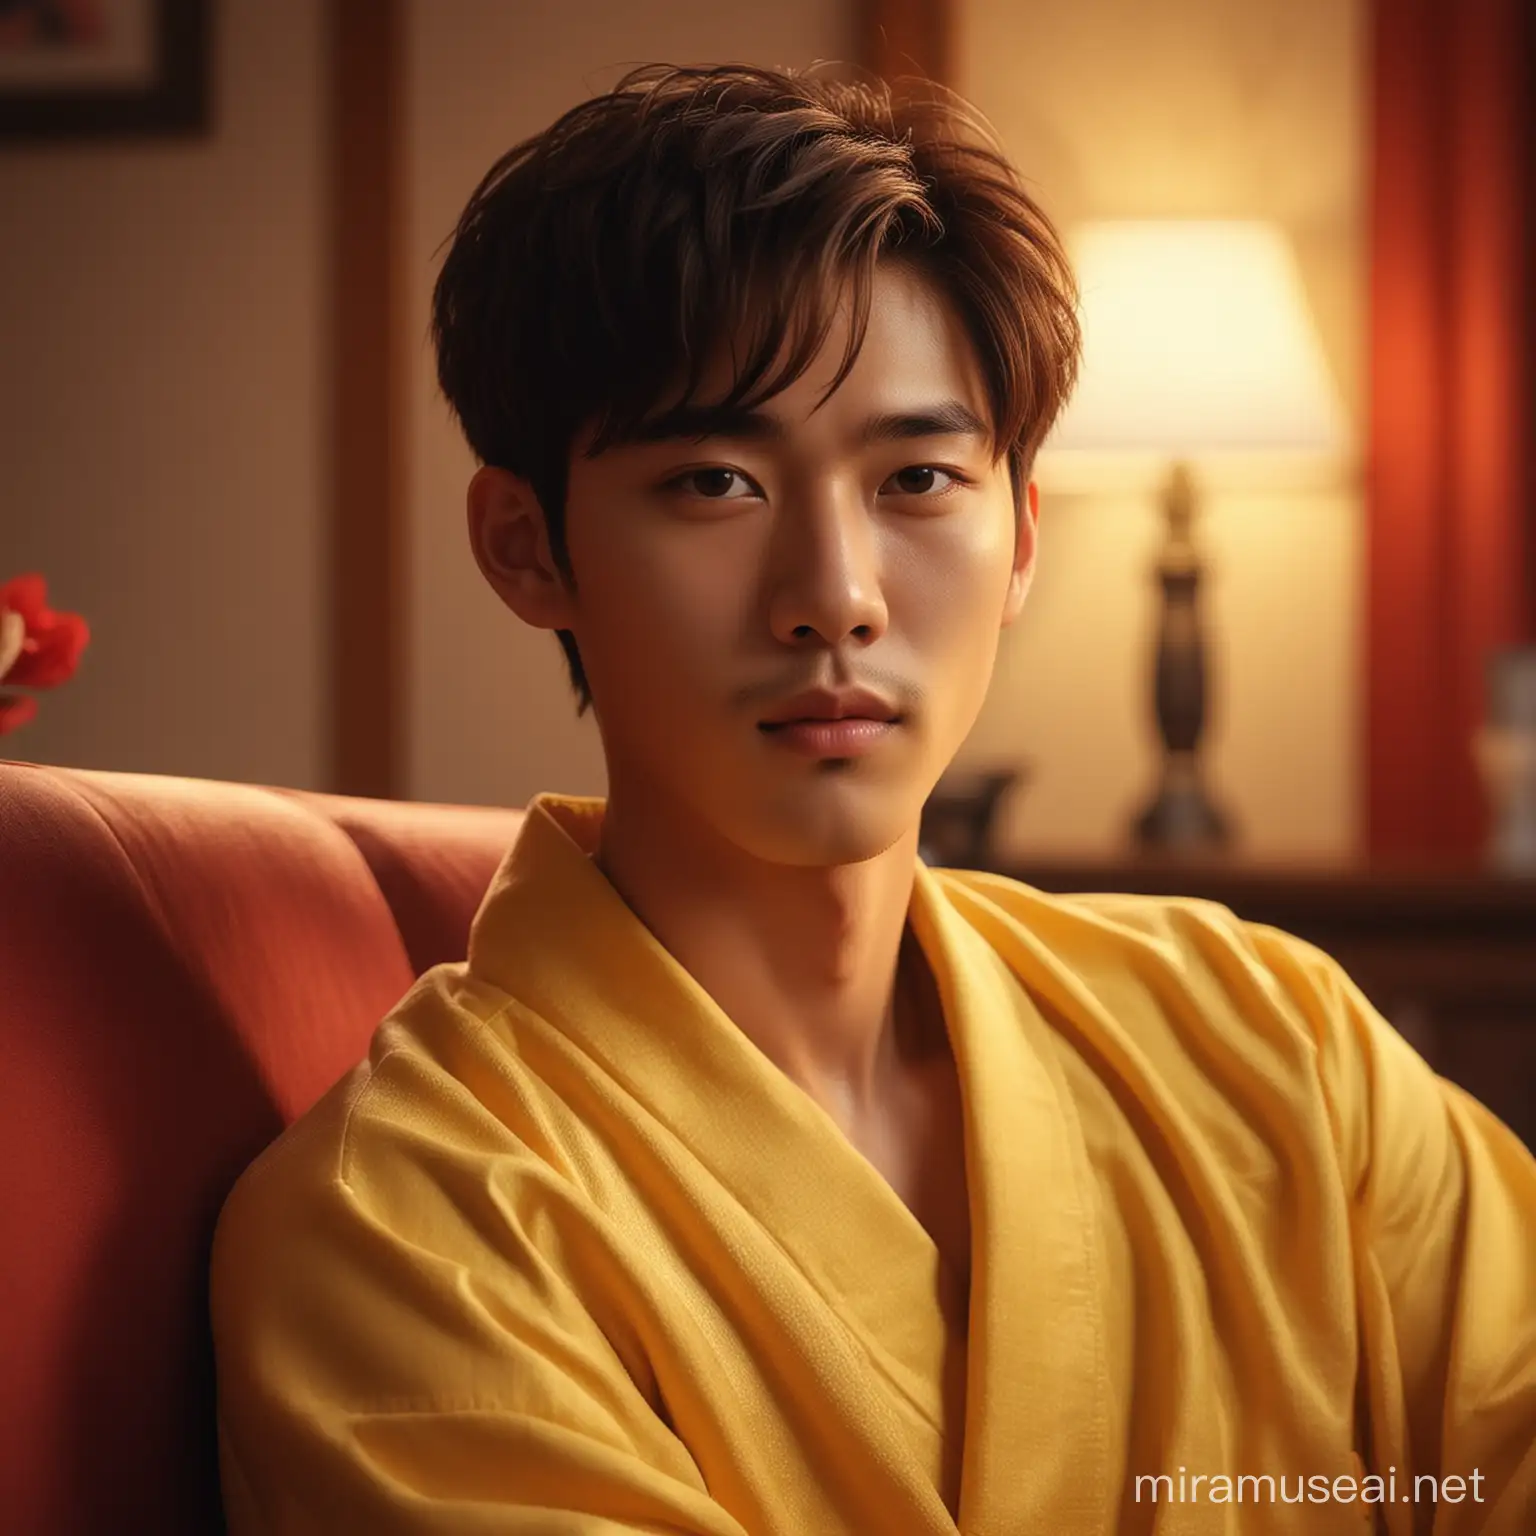 photo realistic, high quality, young korean man, perfect face, brown straight short hair, wearing light-yellow robe, sitting on the armchair, red light night room, detailed brushwork, soft bokeh, depth of field, opulent colors, velvety shadows, meticulous detail, luxurious atmosphere, sumptuous textures 4k HD